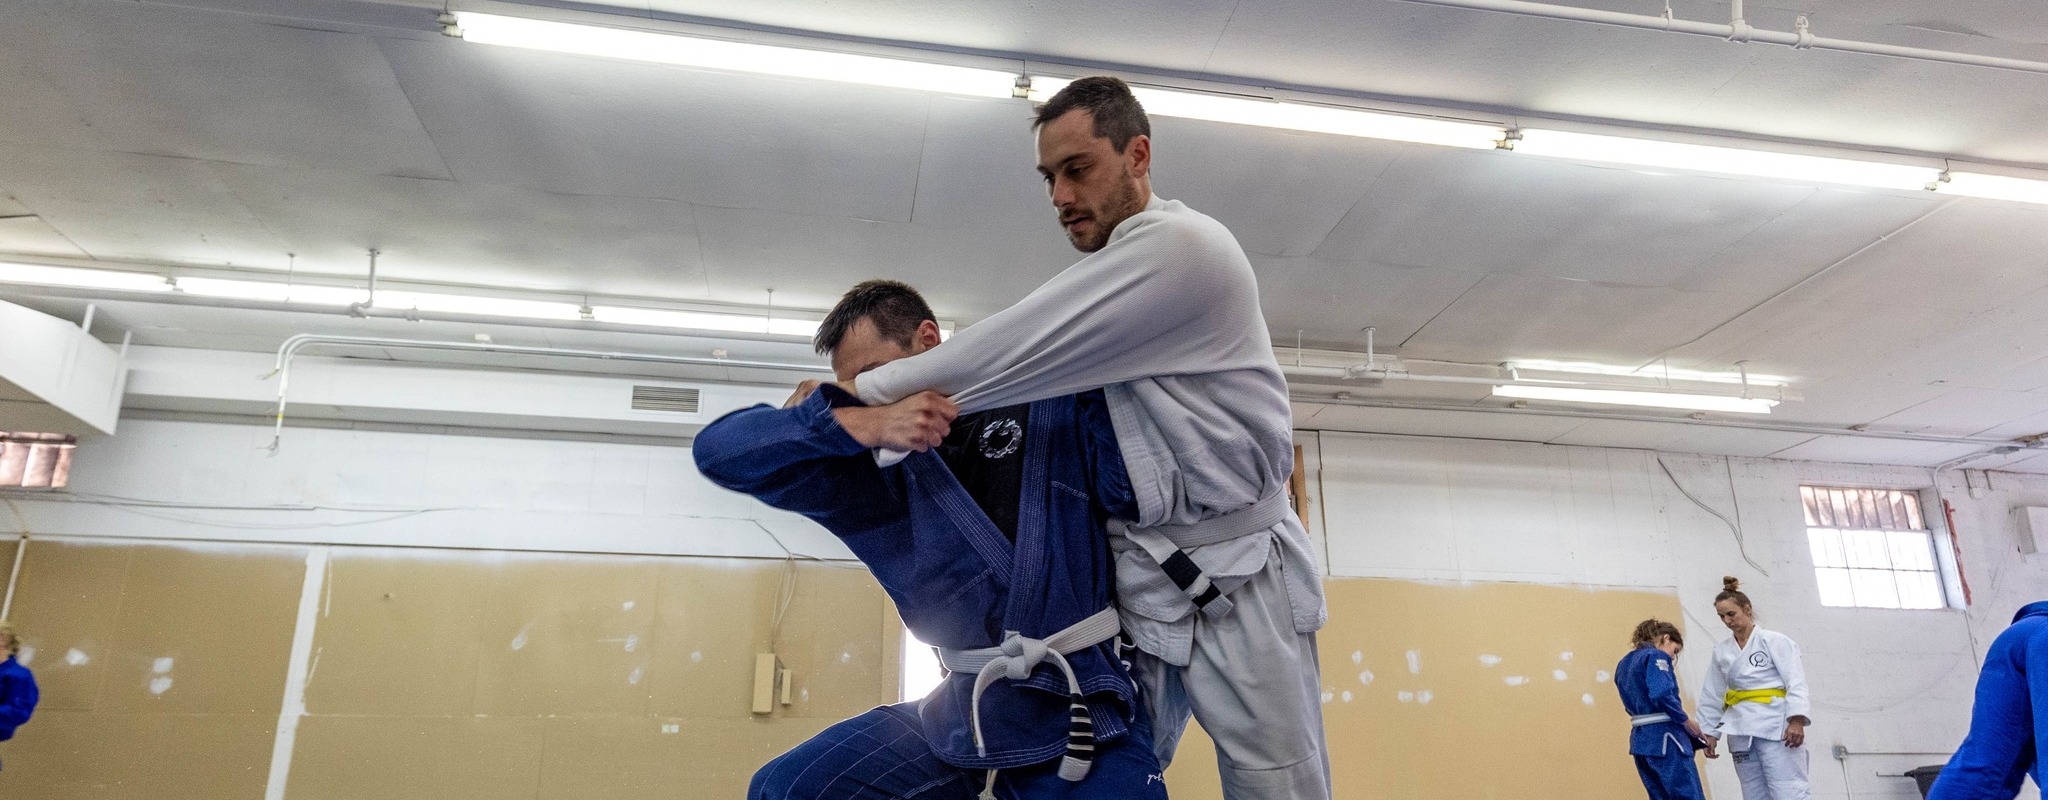 BJJ student practice on the mats, with one student about to be thrown over the shoulder of another